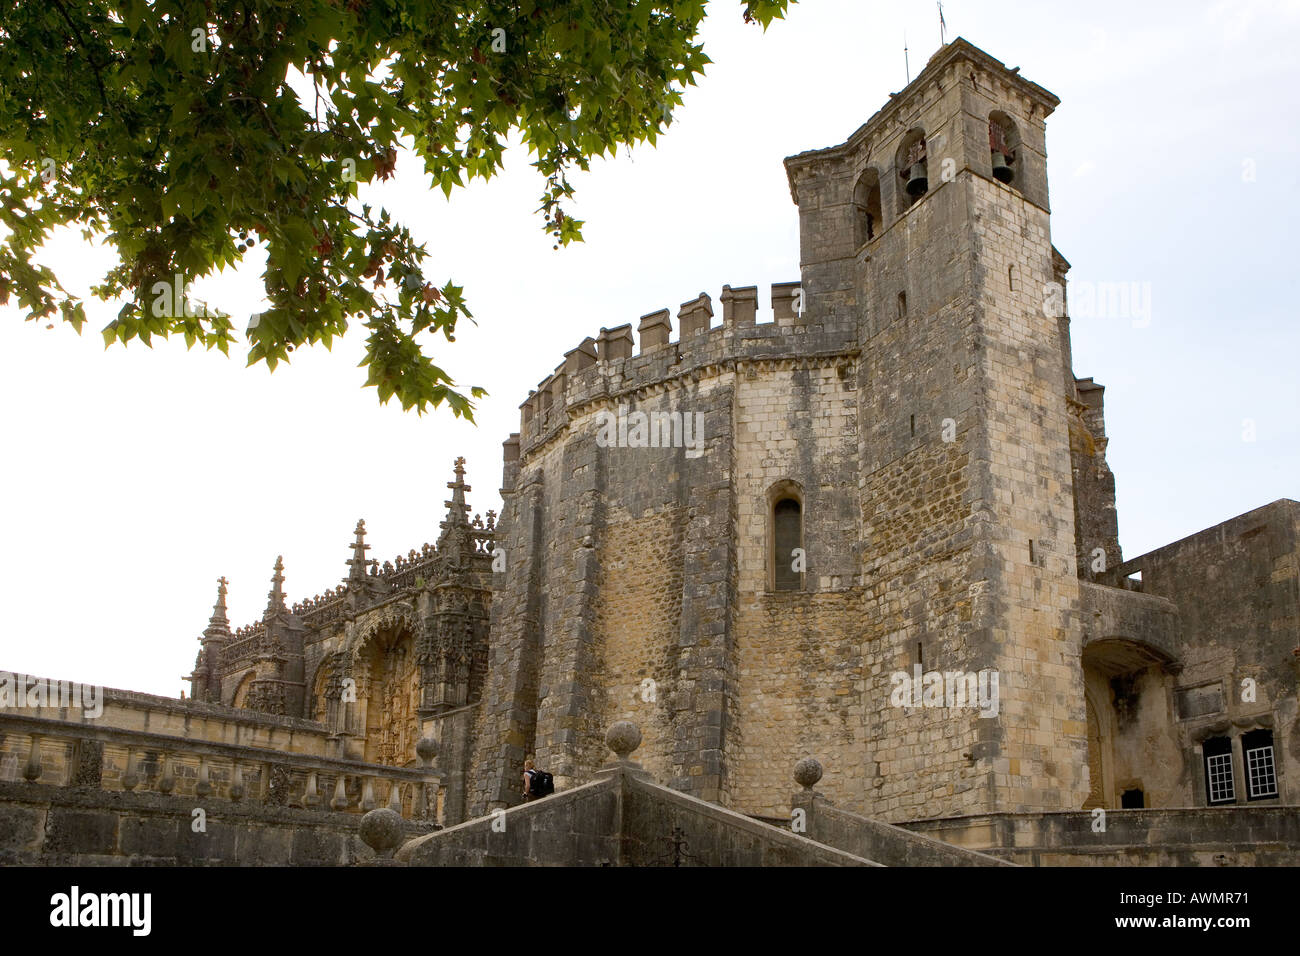 Convento de Christo or Convent of Christ once the headquarters of The Order of the Knights Templar. Stock Photo